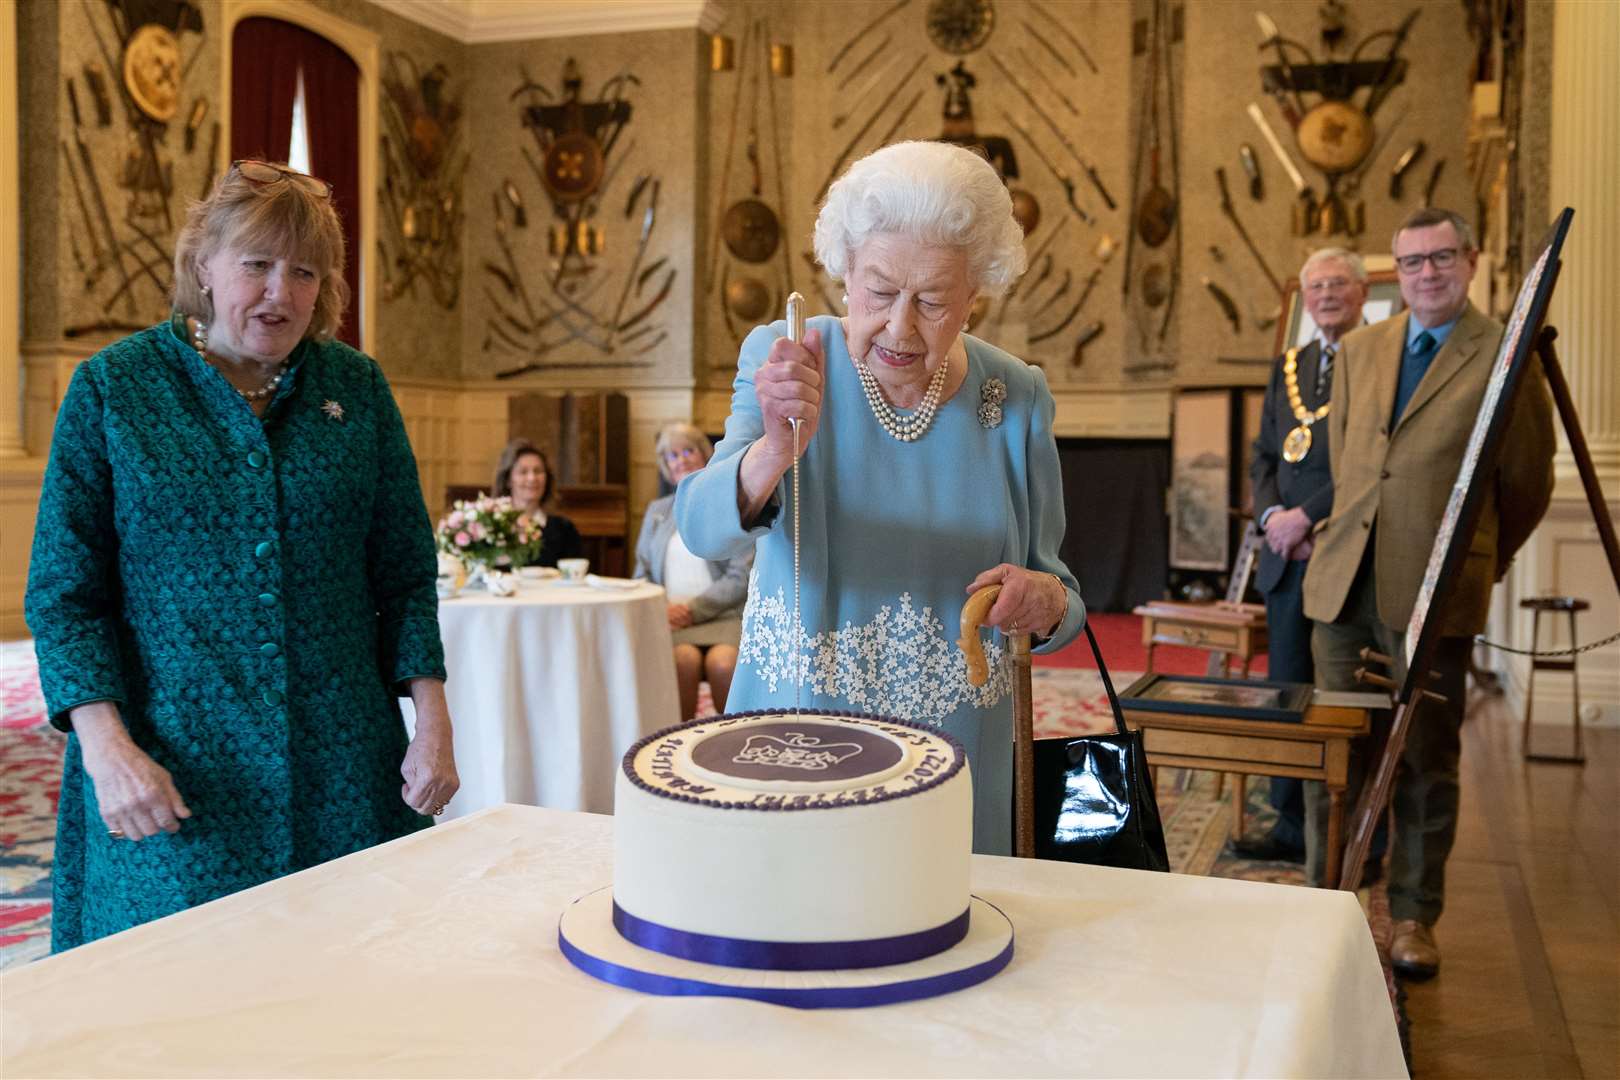 The Queen cutting a cake to celebrate the start of the Platinum Jubilee at Sandringham House (Joe Giddens/PA)